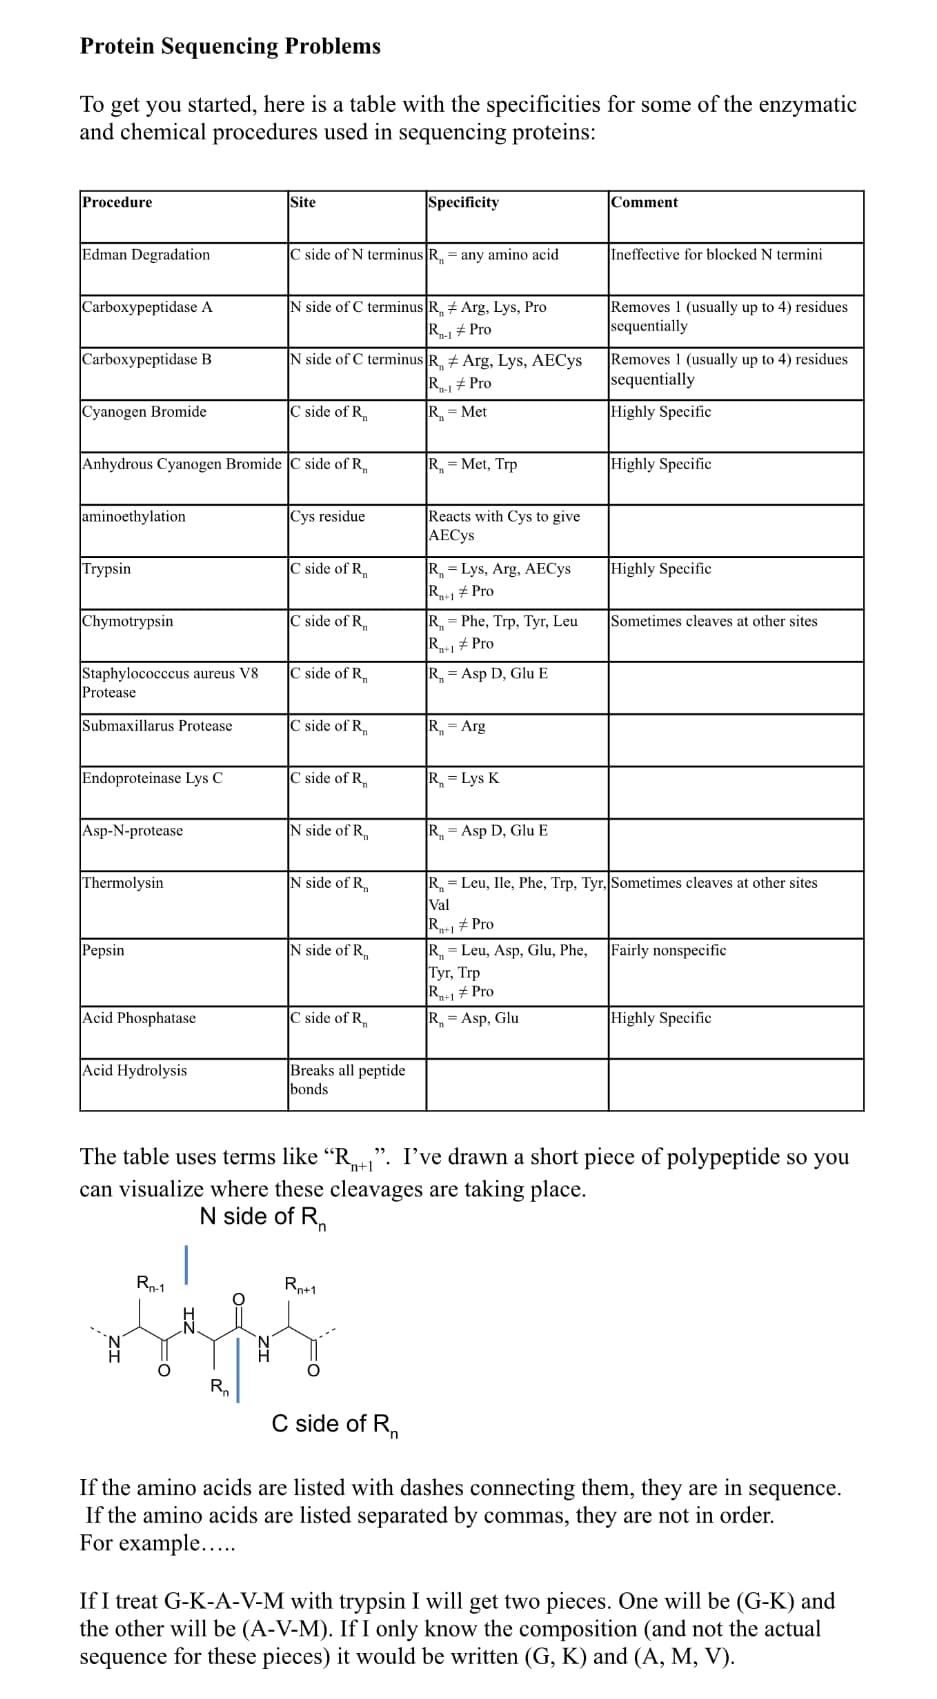 Protein Sequencing Problems
To get you started, here is a table with the specificities for some of the enzymatic
and chemical procedures used in sequencing proteins:
Procedure
Edman Degradation
Carboxypeptidase A
Carboxypeptidase B
Cyanogen Bromide
aminoethylation
Trypsin
Chymotrypsin
Staphylococccus aureus V8
Protease
Anhydrous Cyanogen Bromide C side of R
Submaxillarus Protease
Endoproteinase Lys C
Asp-N-protease
Thermolysin
Pepsin
Acid Phosphatase
Acid Hydrolysis
Site
R₁-1
R₂
C side of N terminus R = any amino acid
N side of C terminus R, # Arg, Lys, Pro
R₁-1 Pro
N side of C terminus R Arg, Lys, AECys
R₁-1 # Pro
R = Met
C side of R₁
Cys residue
C side of R
Cside of R
C side of R
C side of R₁
C side of R
N side of R
N side of R₁
N side of R
Specificity
C side of R₁
Breaks all peptide
bonds
Rn+1
R = Met, Trp
Reacts with Cys to give
AECys
R = Lys, Arg, AECys
R₂+1 #Pro
R - Phe, Trp, Tyr, Leu
R₁+1 #Pro
R = Asp D, Glu E
R = Arg
R = Lys K
R = Asp D, Glu E
Comment
Ineffective for blocked N termini
Removes 1 (usually up to 4) residues
sequentially
Removes 1 (usually up to 4) residues
sequentially
Highly Specific
Highly Specific
Highly Specific
Sometimes cleaves at other sites
R = Leu, Ile, Phe, Trp, Tyr, Sometimes cleaves at other sites
Val
R₁+1 #Pro
R = Leu, Asp, Glu, Phe,
Tyr, Trp
R₁+1 # Pro
R = Asp, Glu
The table uses terms like "R". I've drawn a short piece of polypeptide so you
can visualize where these cleavages are taking place.
N side of R₁
Fairly nonspecific
Highly Specific
C side of R₁
If the amino acids are listed with dashes connecting them, they are in sequence.
If the amino acids are listed separated by commas, they are not in order.
For example.....
If I treat G-K-A-V-M with trypsin I will get two pieces. One will be (G-K) and
the other will be (A-V-M). If I only know the composition (and not the actual
sequence for these pieces) it would be written (G, K) and (A, M, V).